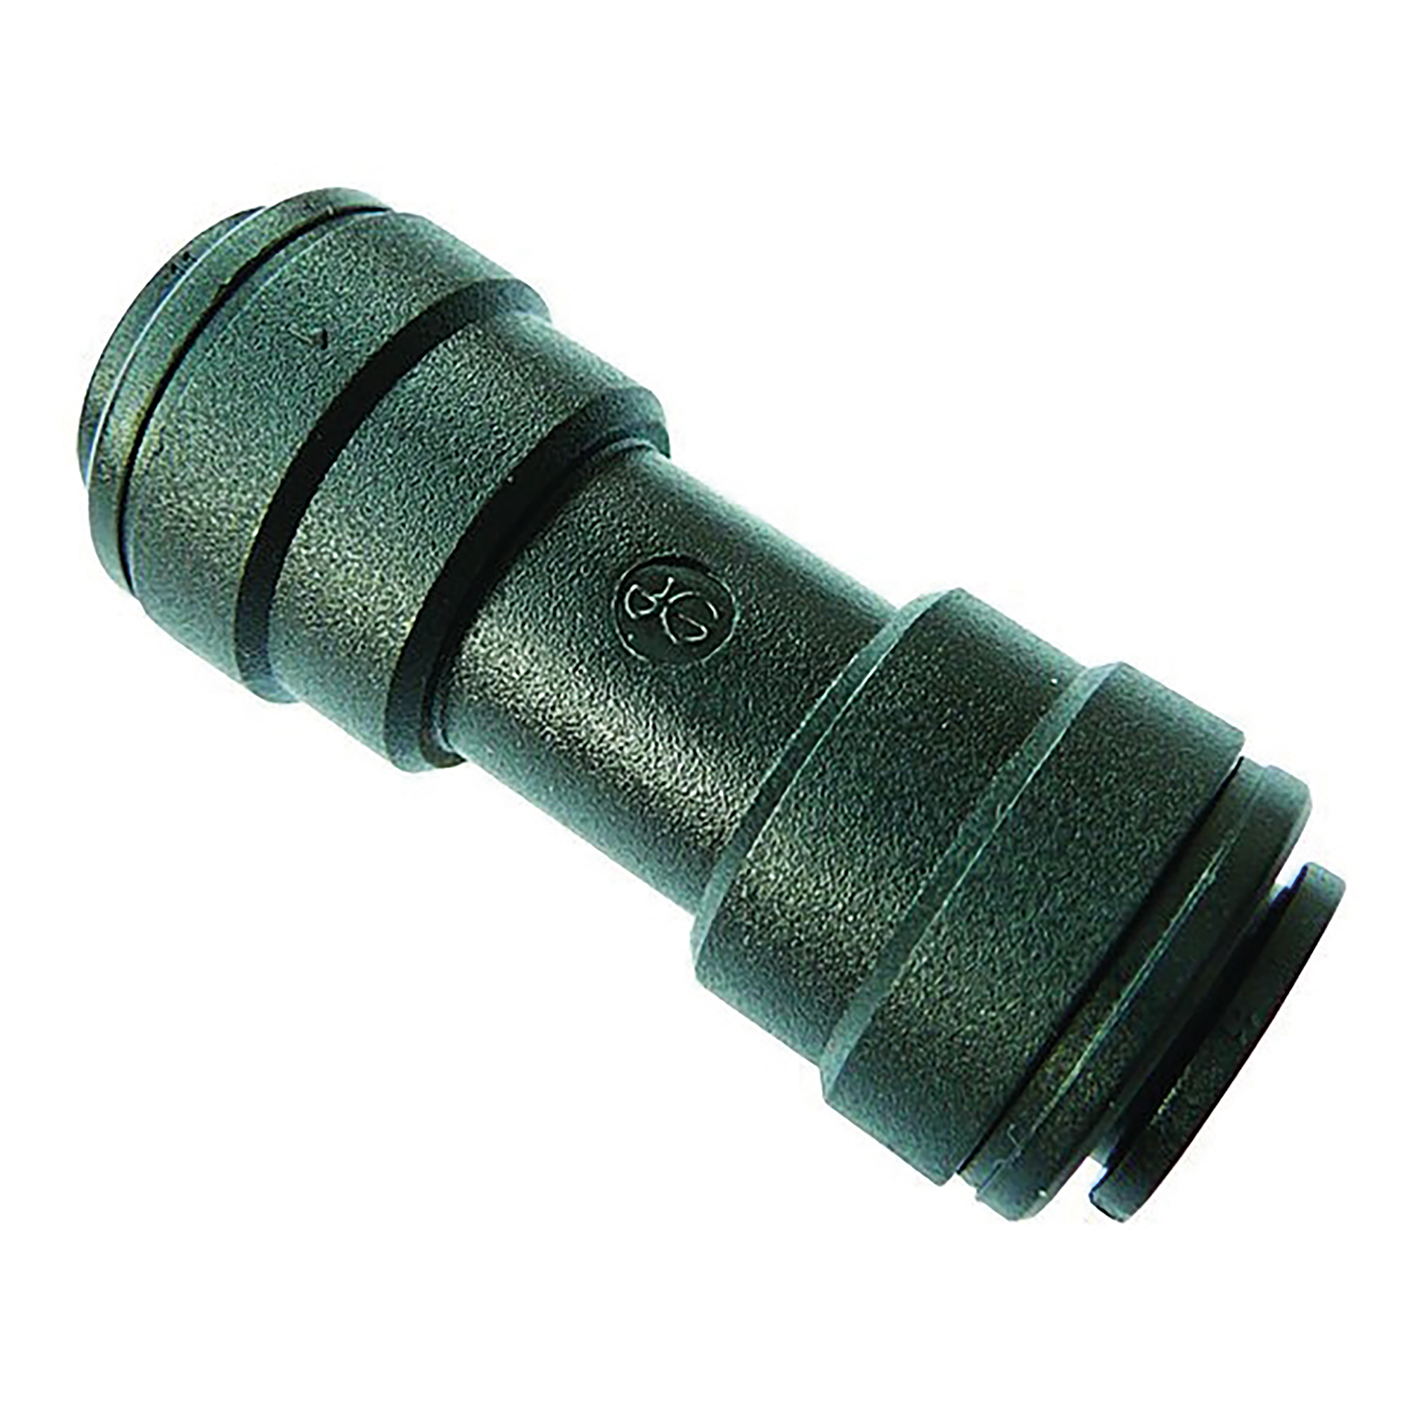 5mm OD Straight Connector